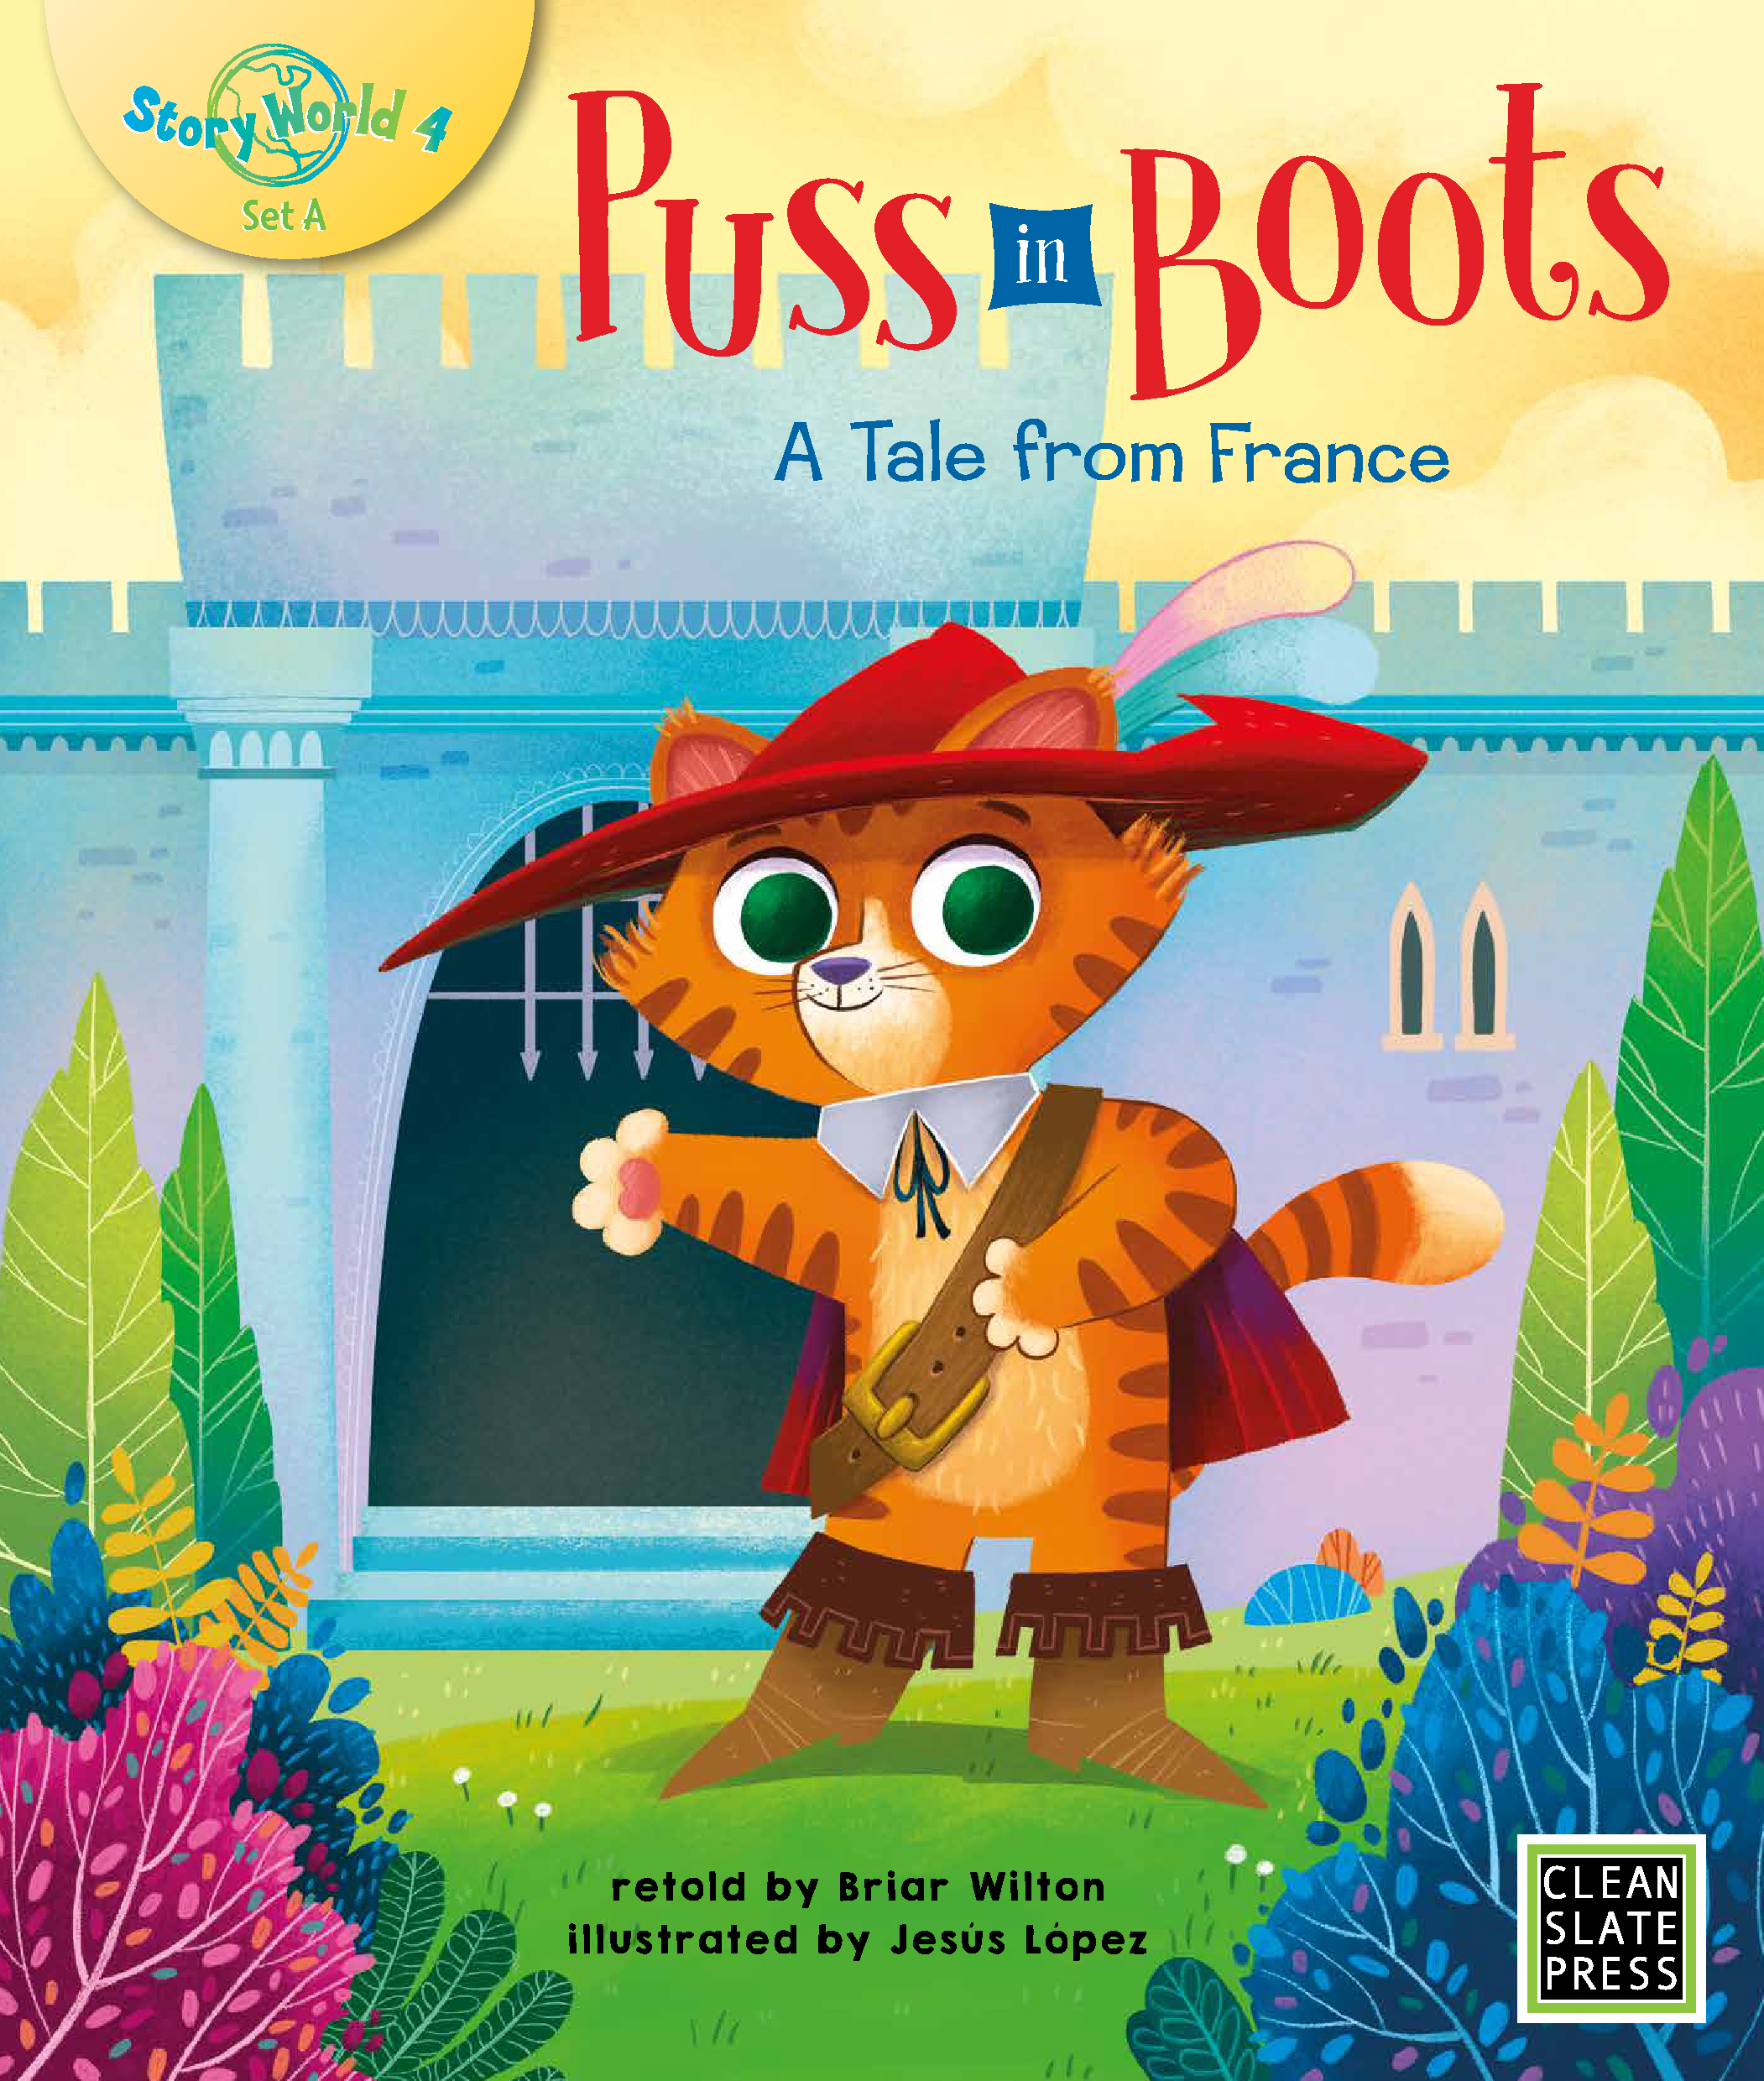 Boots　(Big　Book)　Puss　in